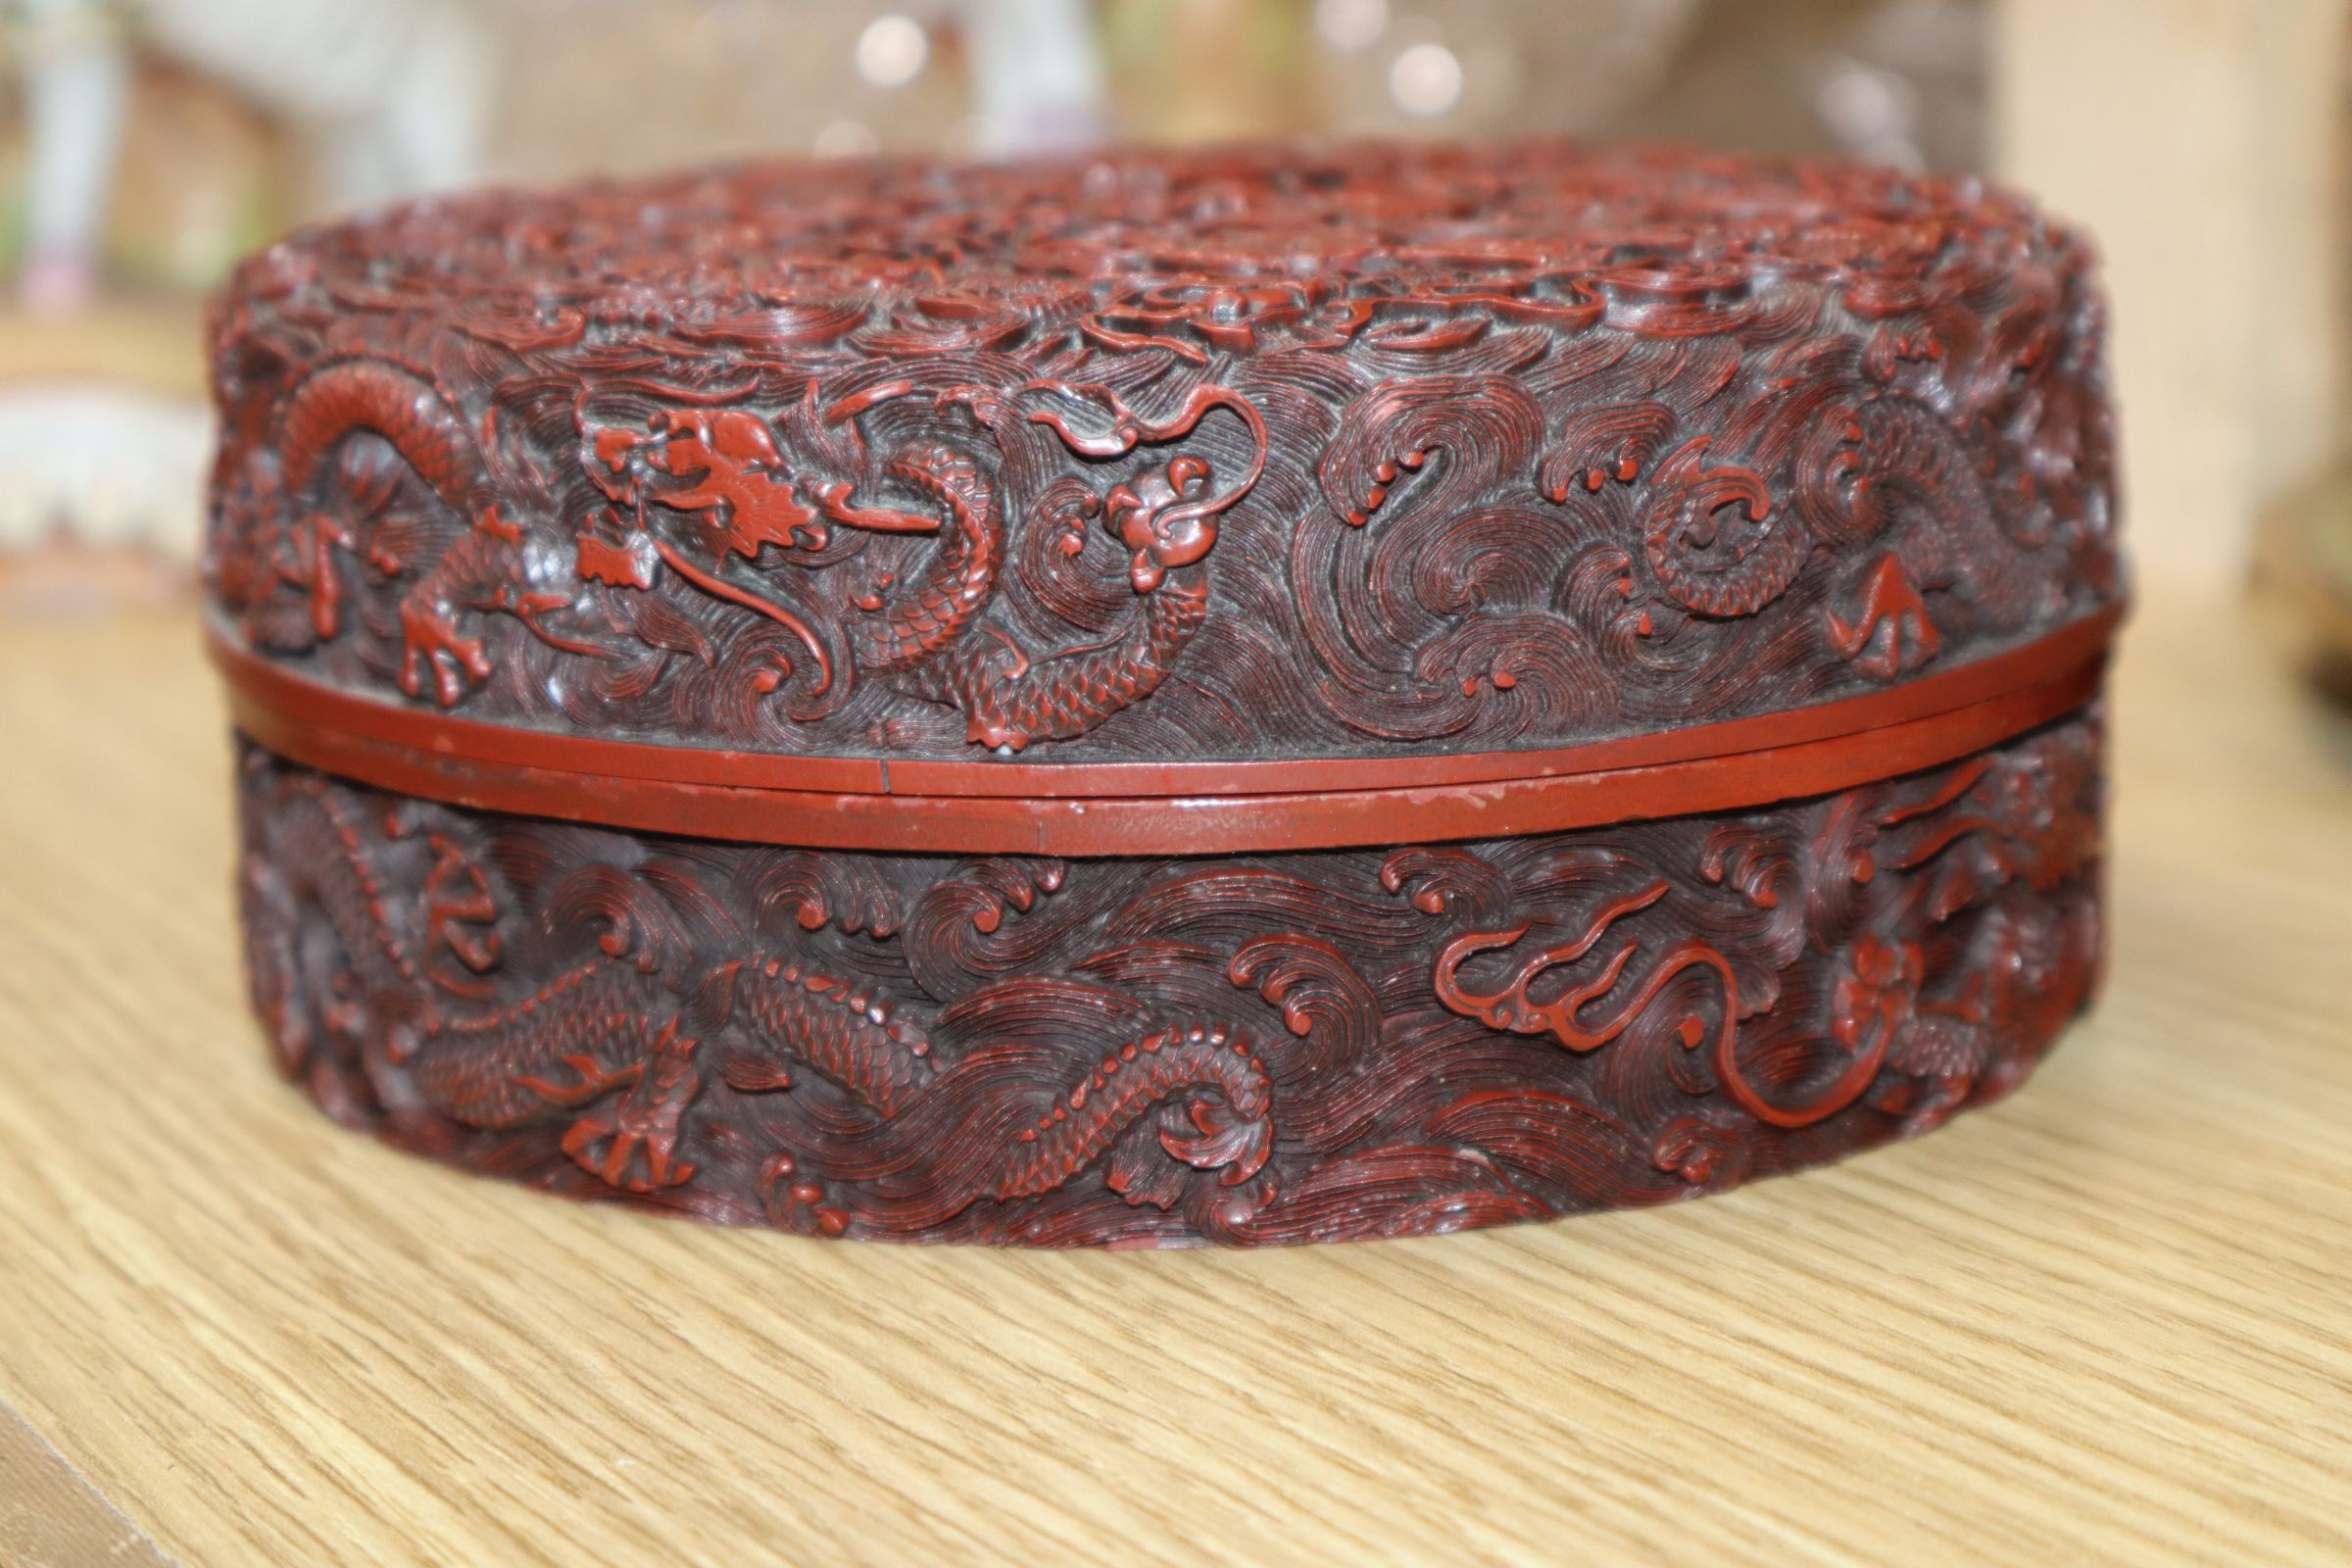 A Chinese bronze vase, a Persian dish and a 'Dragon' box dish diameter 36cm - Image 6 of 20